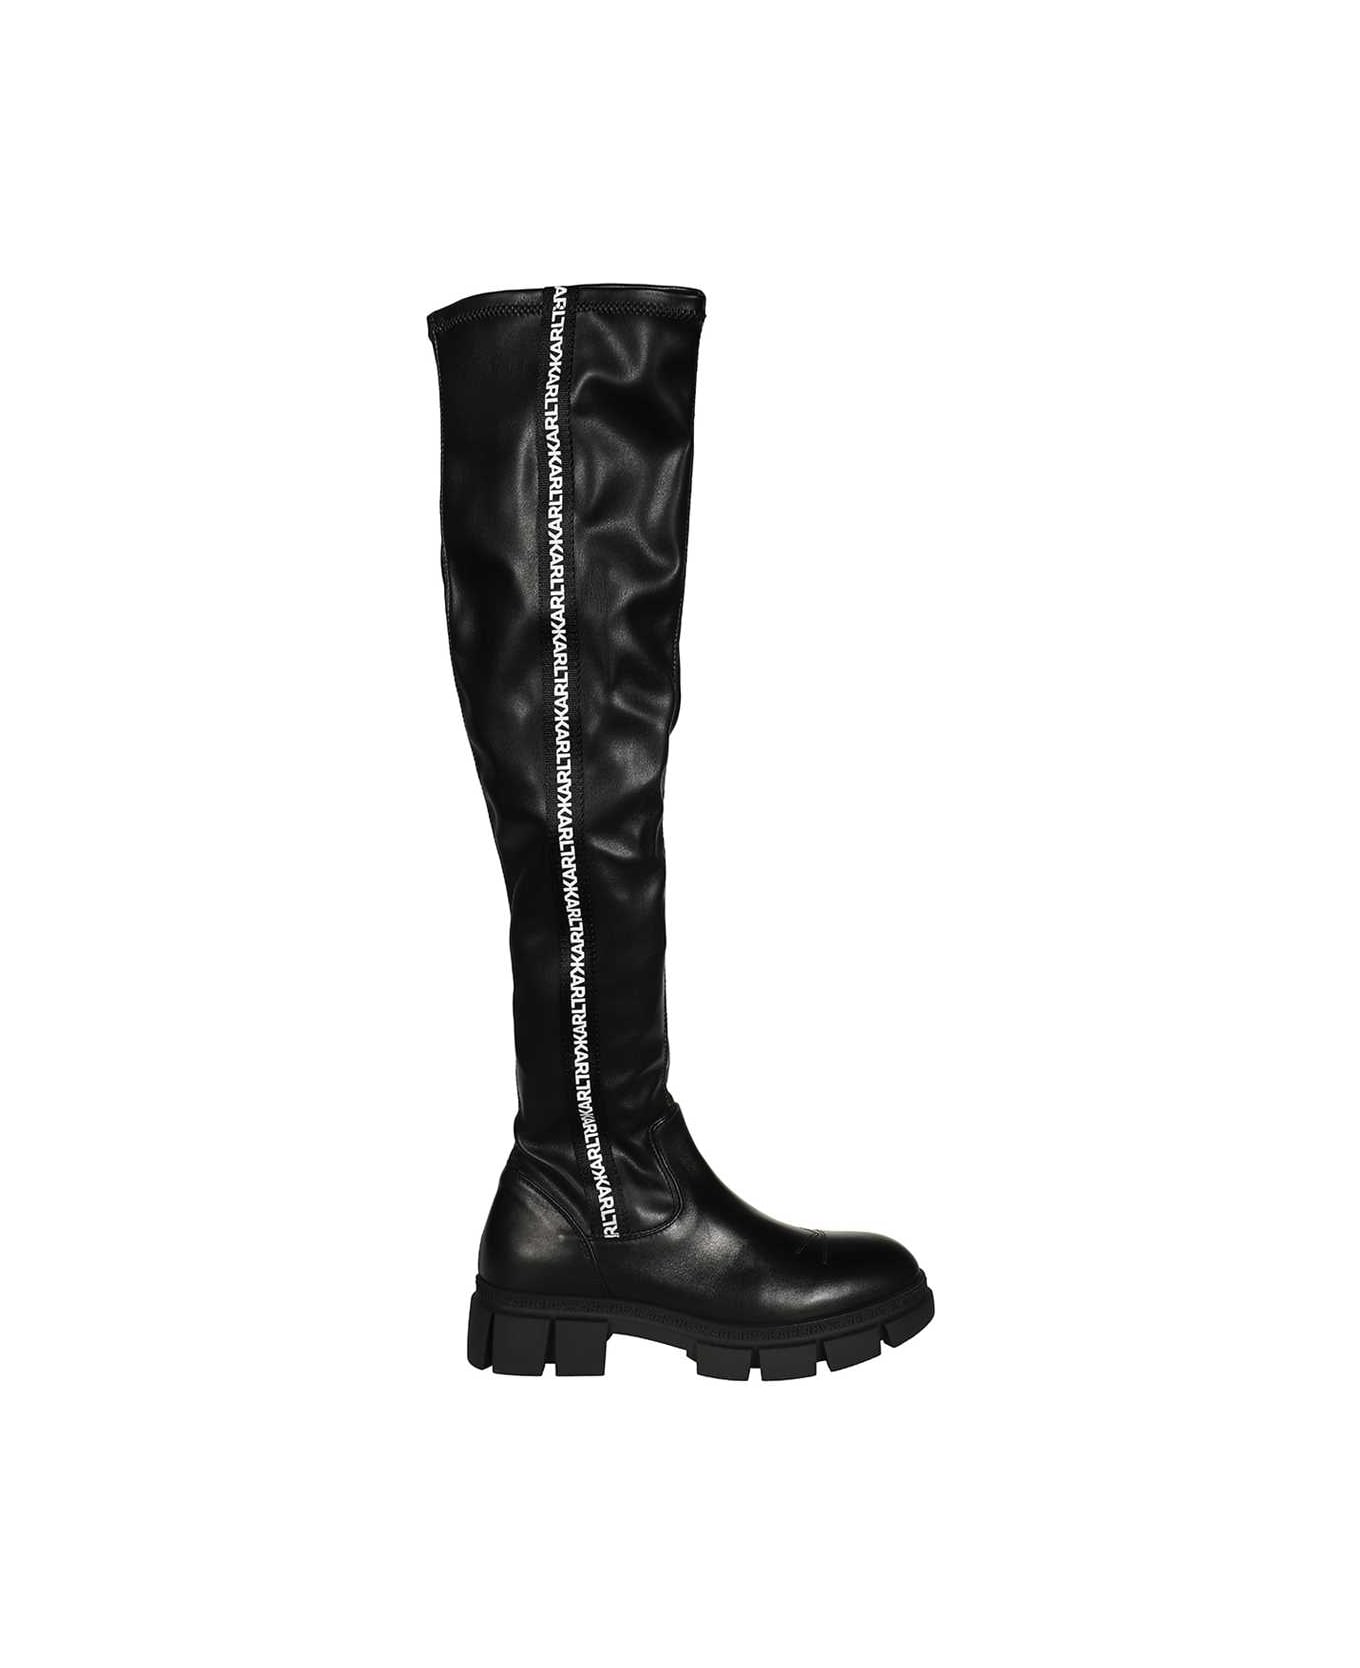 Karl Lagerfeld Over-the-knee Boots - black ブーツ